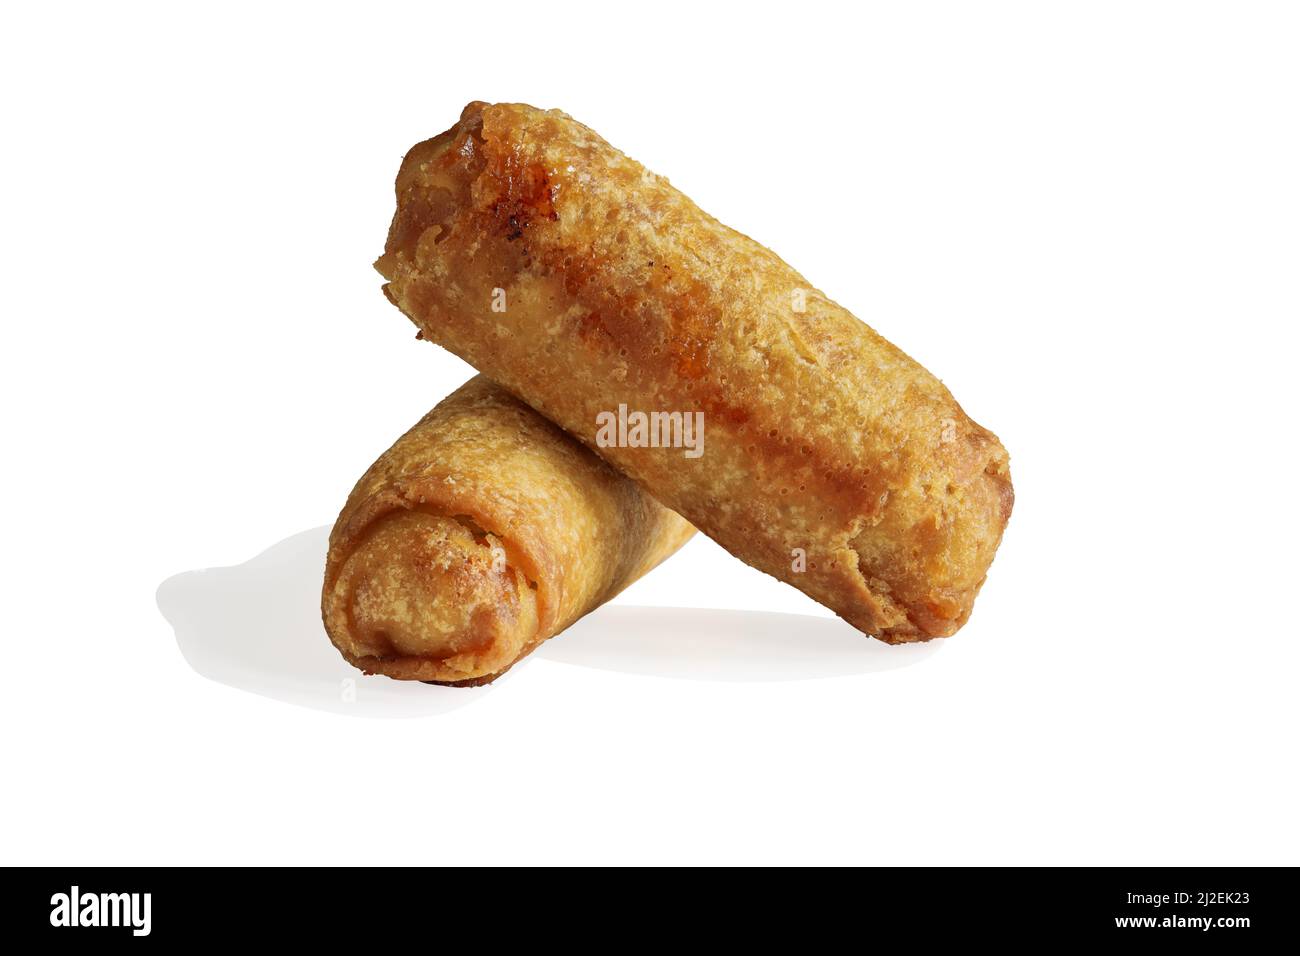 Two Egg rolls stacked together and isolated over a white background with light shadow. Clipping path included. Stock Photo